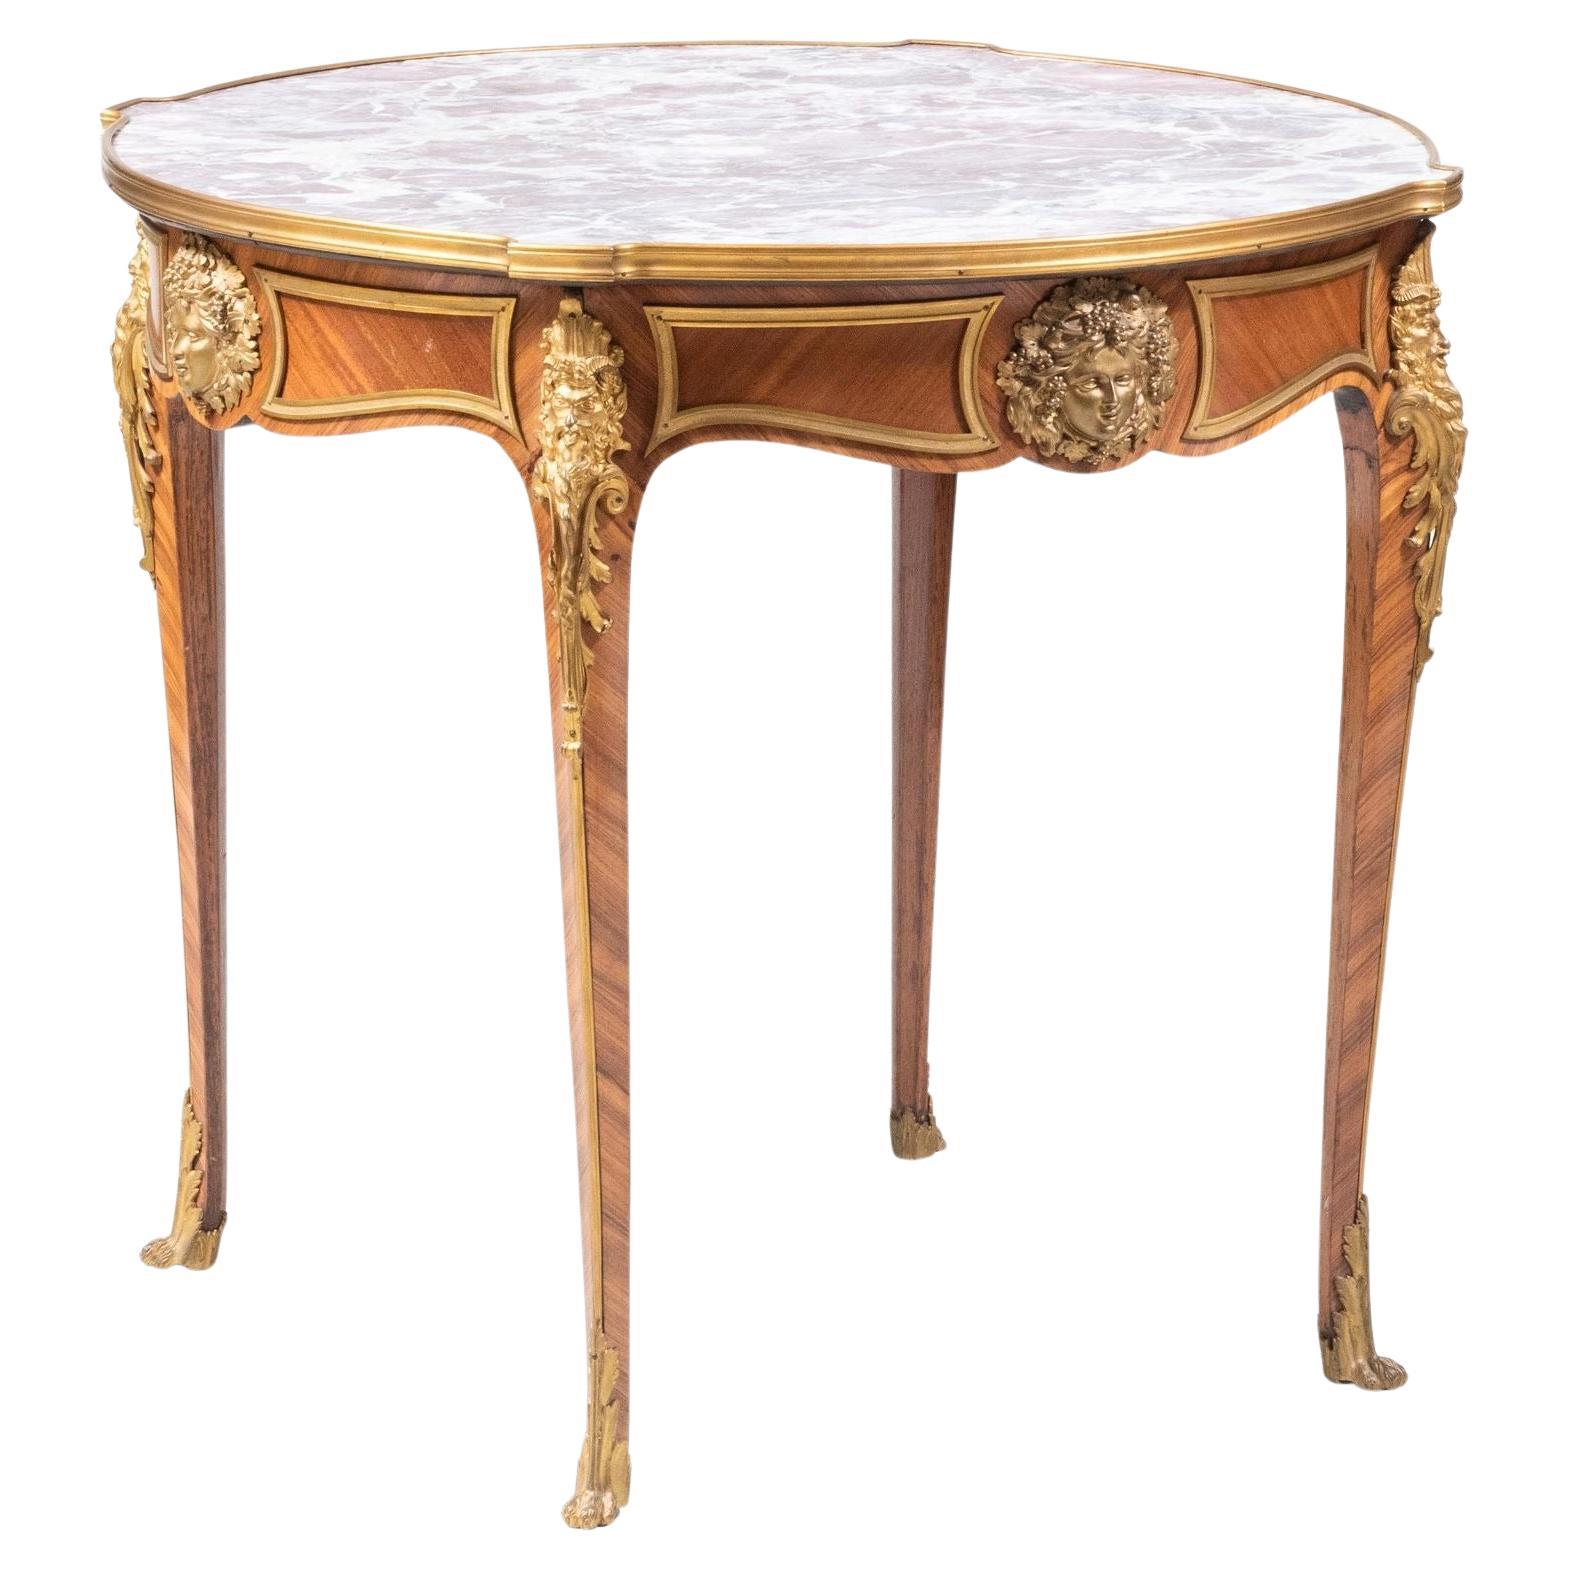 19th Century French Bronze Mounted Marble Top Center Table in Louis XV Style For Sale